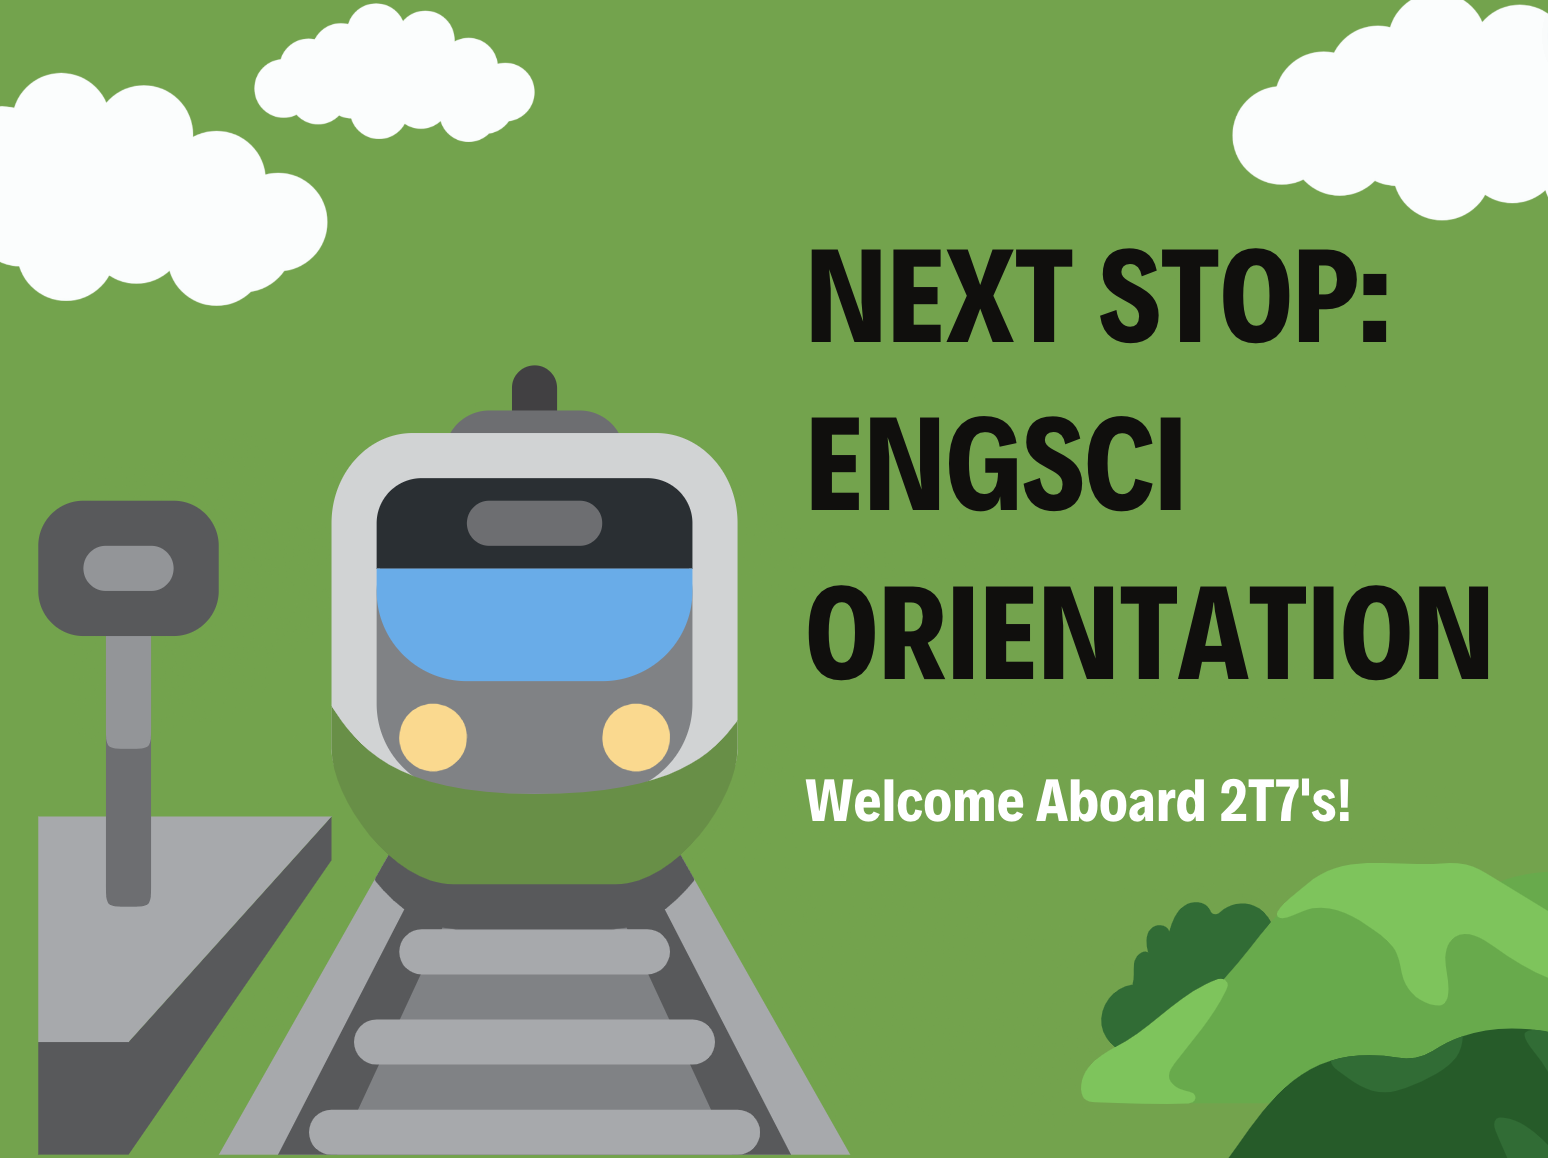 Title: EngSci Summer Orientation Program Welcome Graphic
Description: An image representation of the EngSci Summer Orientation Program, featuring a train making a station stop representing the start of the EngSci Orientation Program. 
